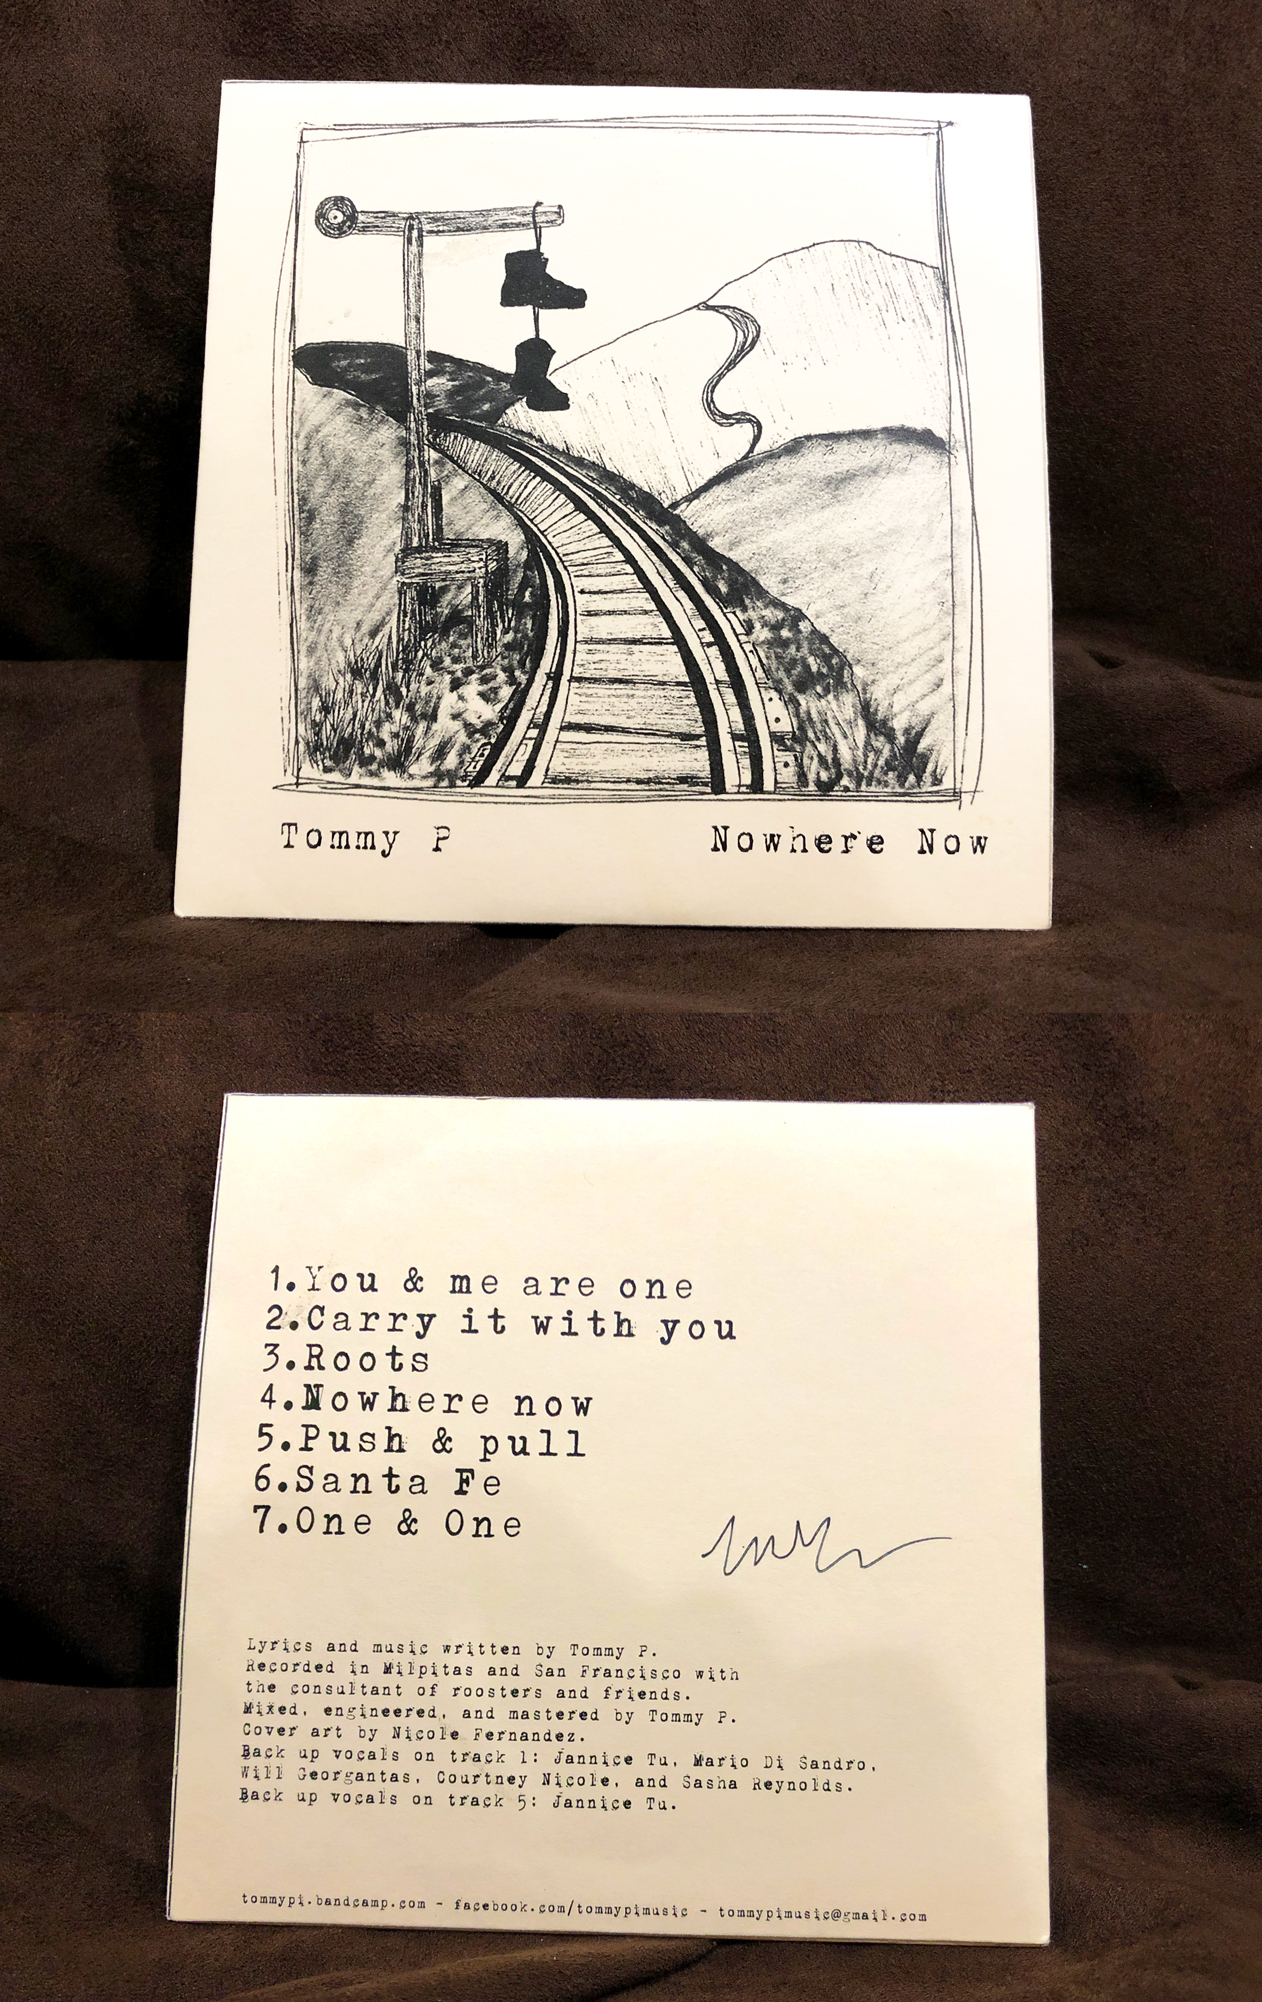 Client: Tommy P, singer-songwriter, multi-instrumentalist, and touring musician based in San Francisco, CA. Description: Designed the packaging for Tommy P's album, single-wallet jacket.